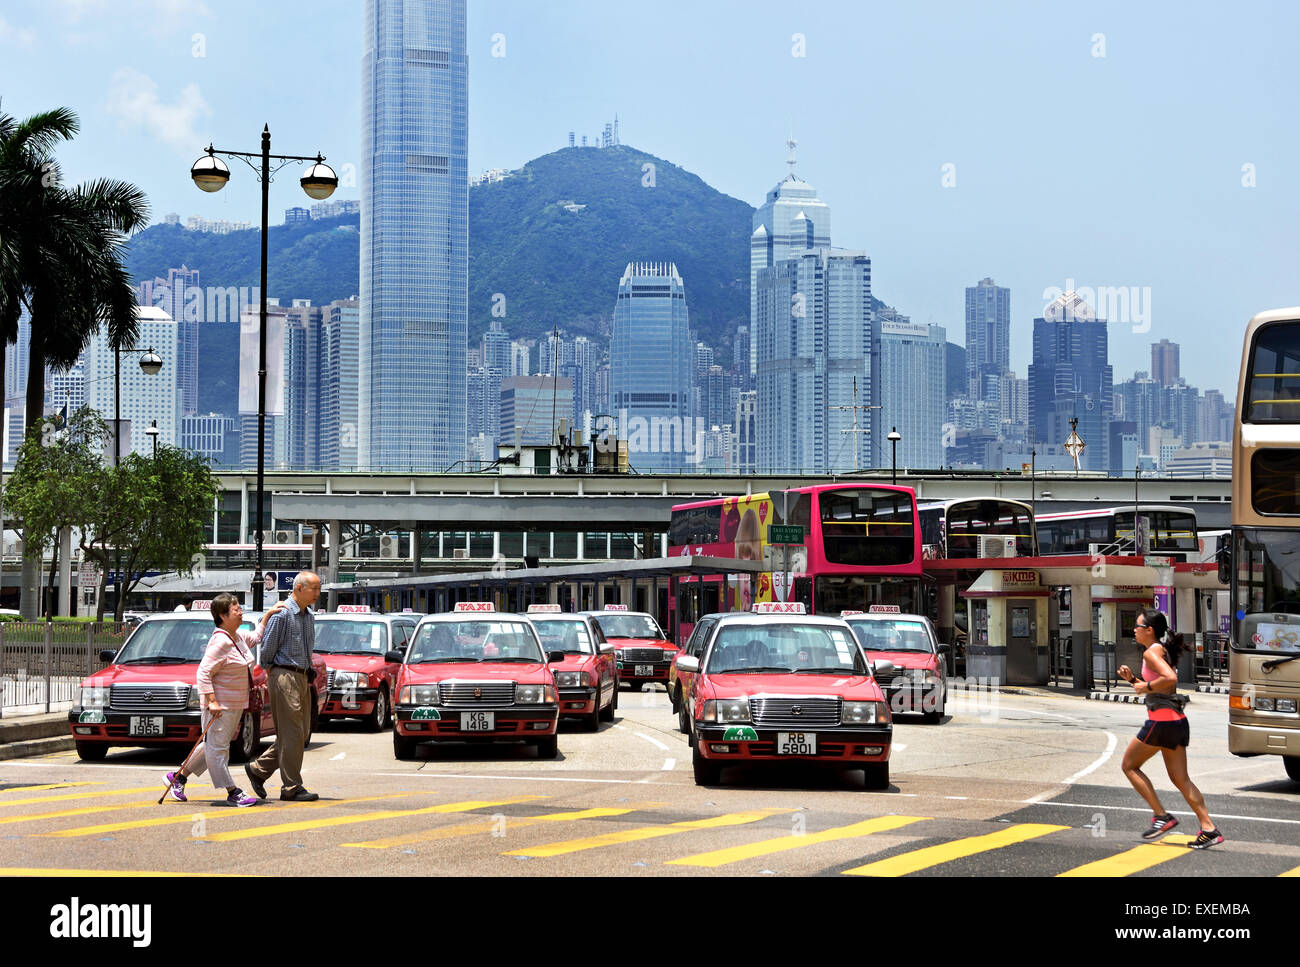 Hong Kong Island Stadt Skyline Wolkenkratzer China Victoria Harbour Ferry Boat Kowloon Taxi und Bus Station Stockfoto